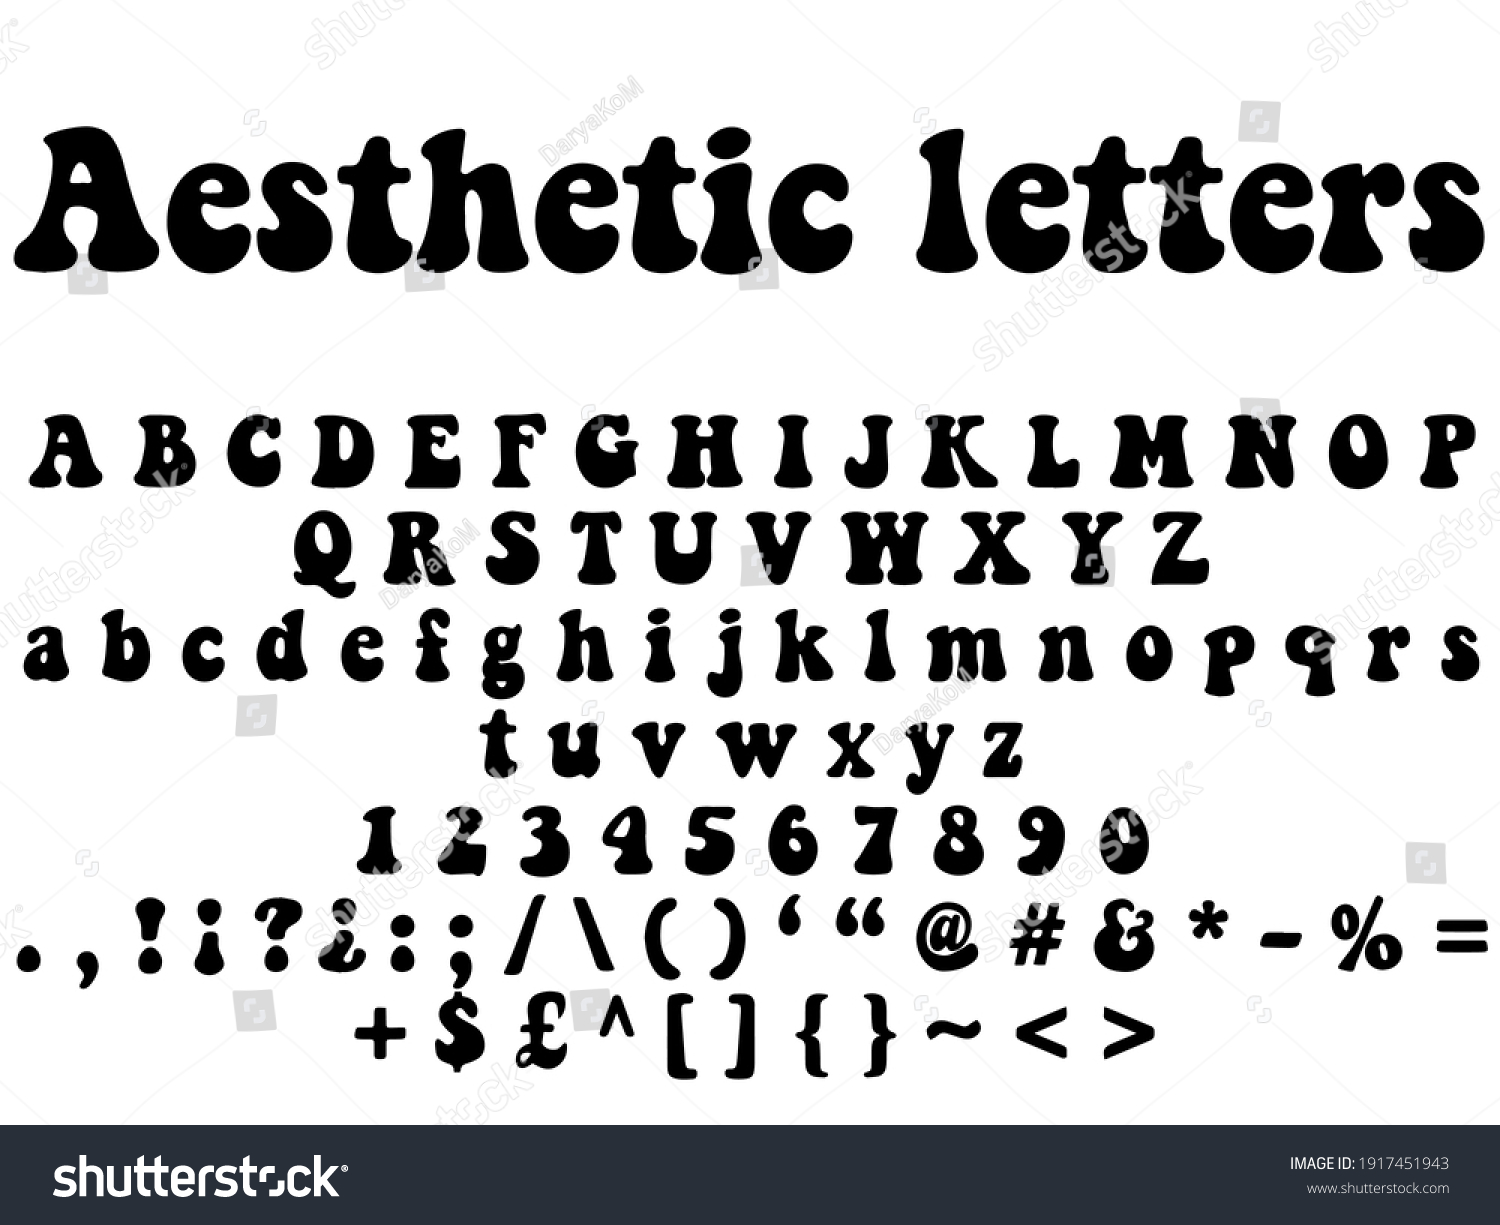 Aesthetic Letters Aesthetic Fonts Aesthetic Aesthetic | Images and ...